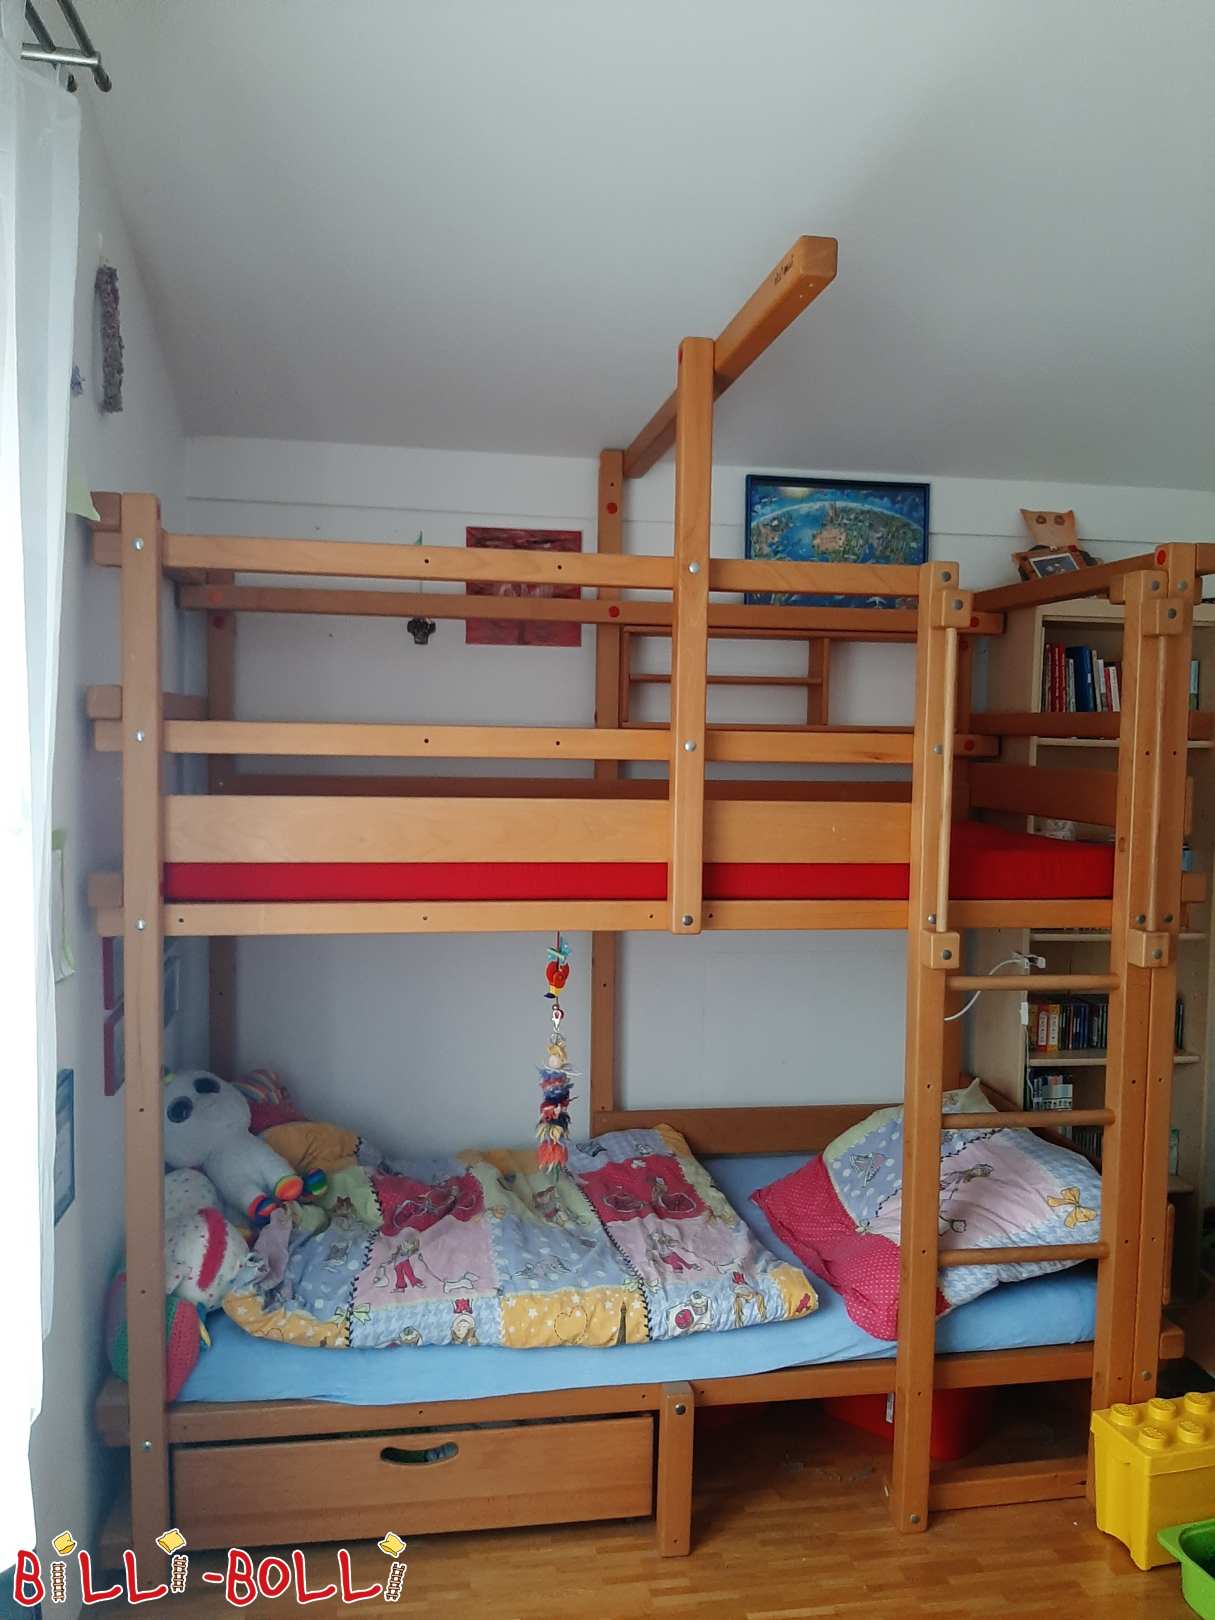 Loft bed that grows with the child with conversion set to a bunk bed (Category: Accessories/extension parts pre-owned)